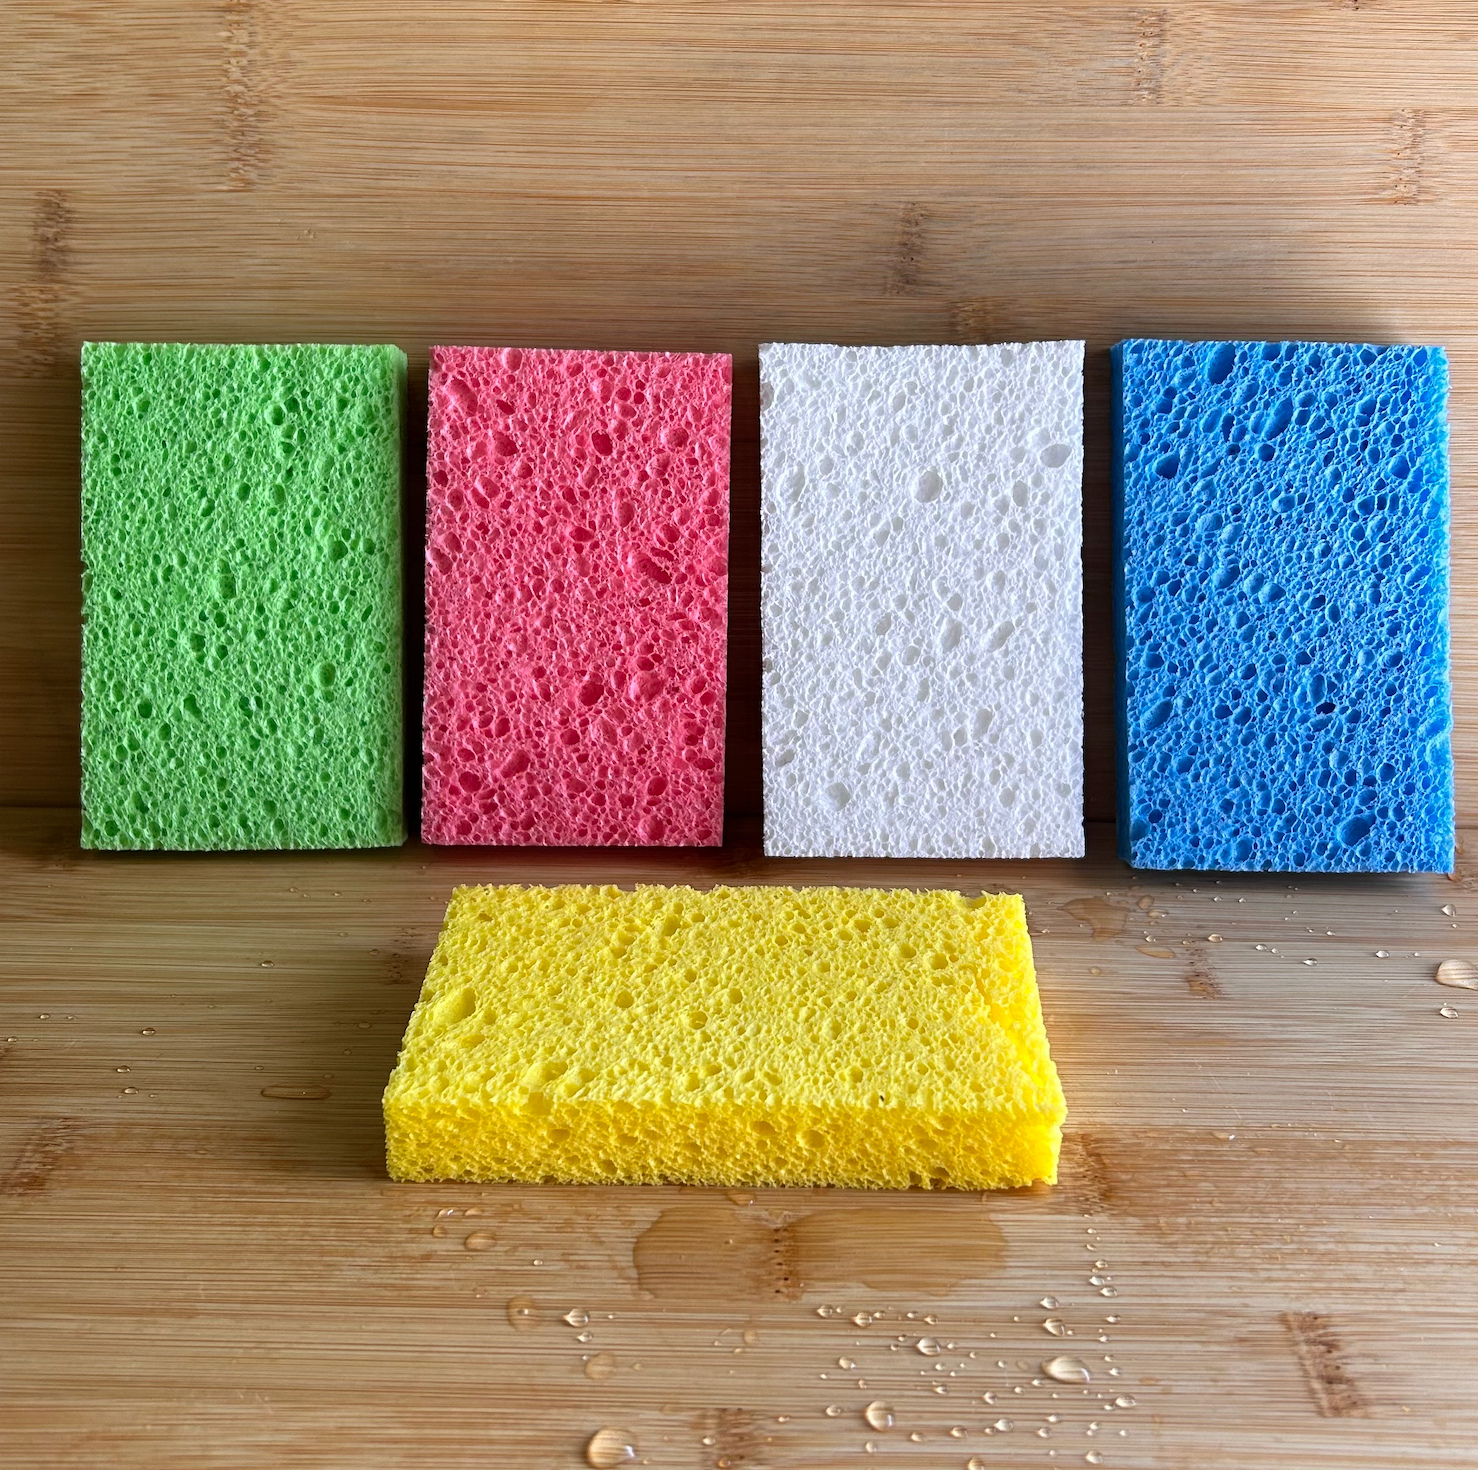 Bamboo Switch - Compostable Cellulose Sponge | Market Bestseller Bamboo Switch